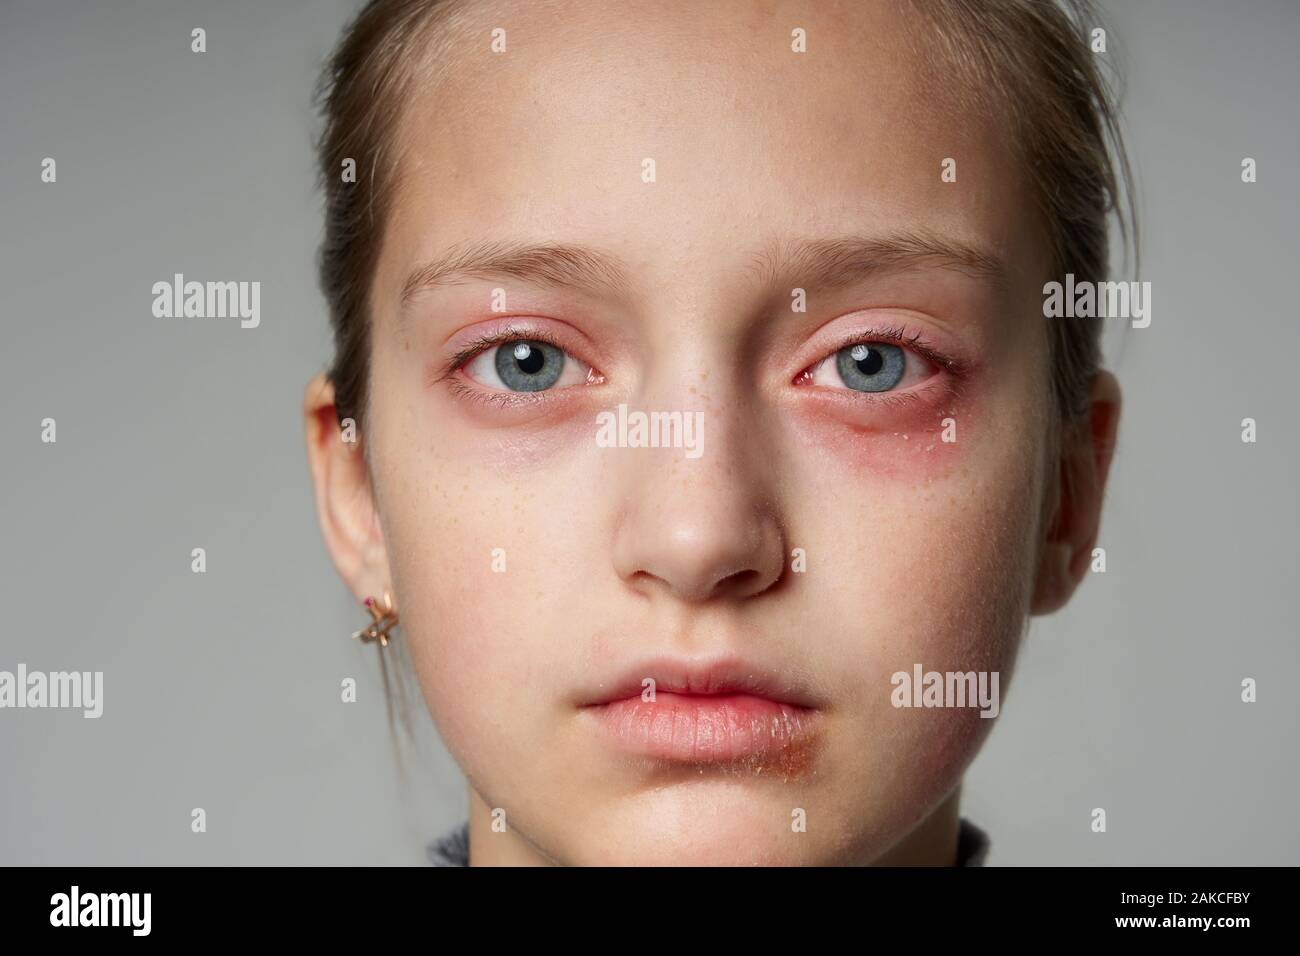 Allergic reaction, skin rash, close view portrait a girl's face. Redness and inflammation of the skin in the eyes and lips. Immune system disease Stock Photo Alamy